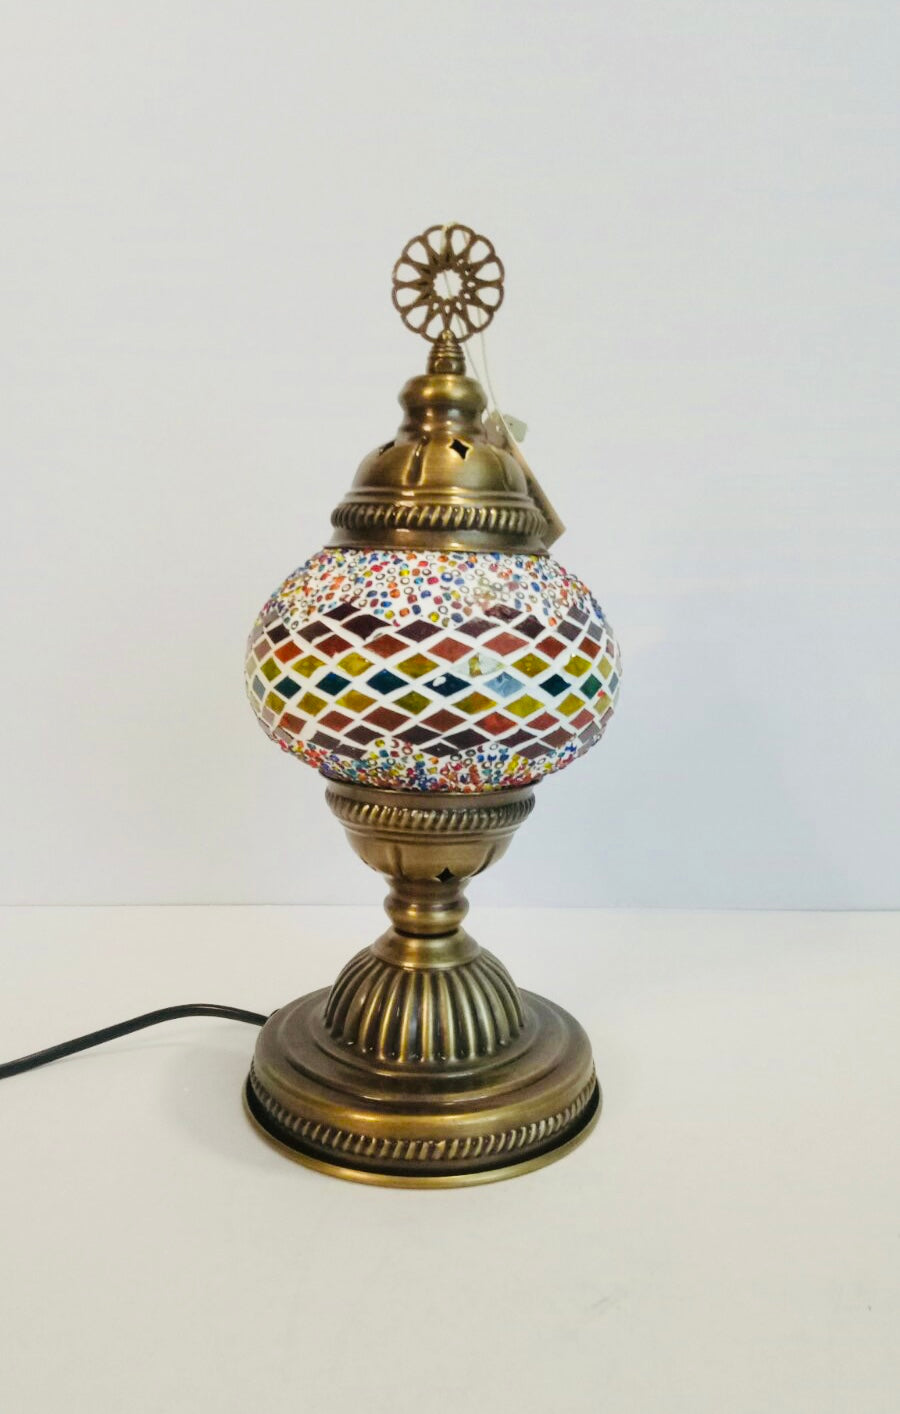 Filigree Mosaic Table Lamp - Green/ Yellow/ Red Weave